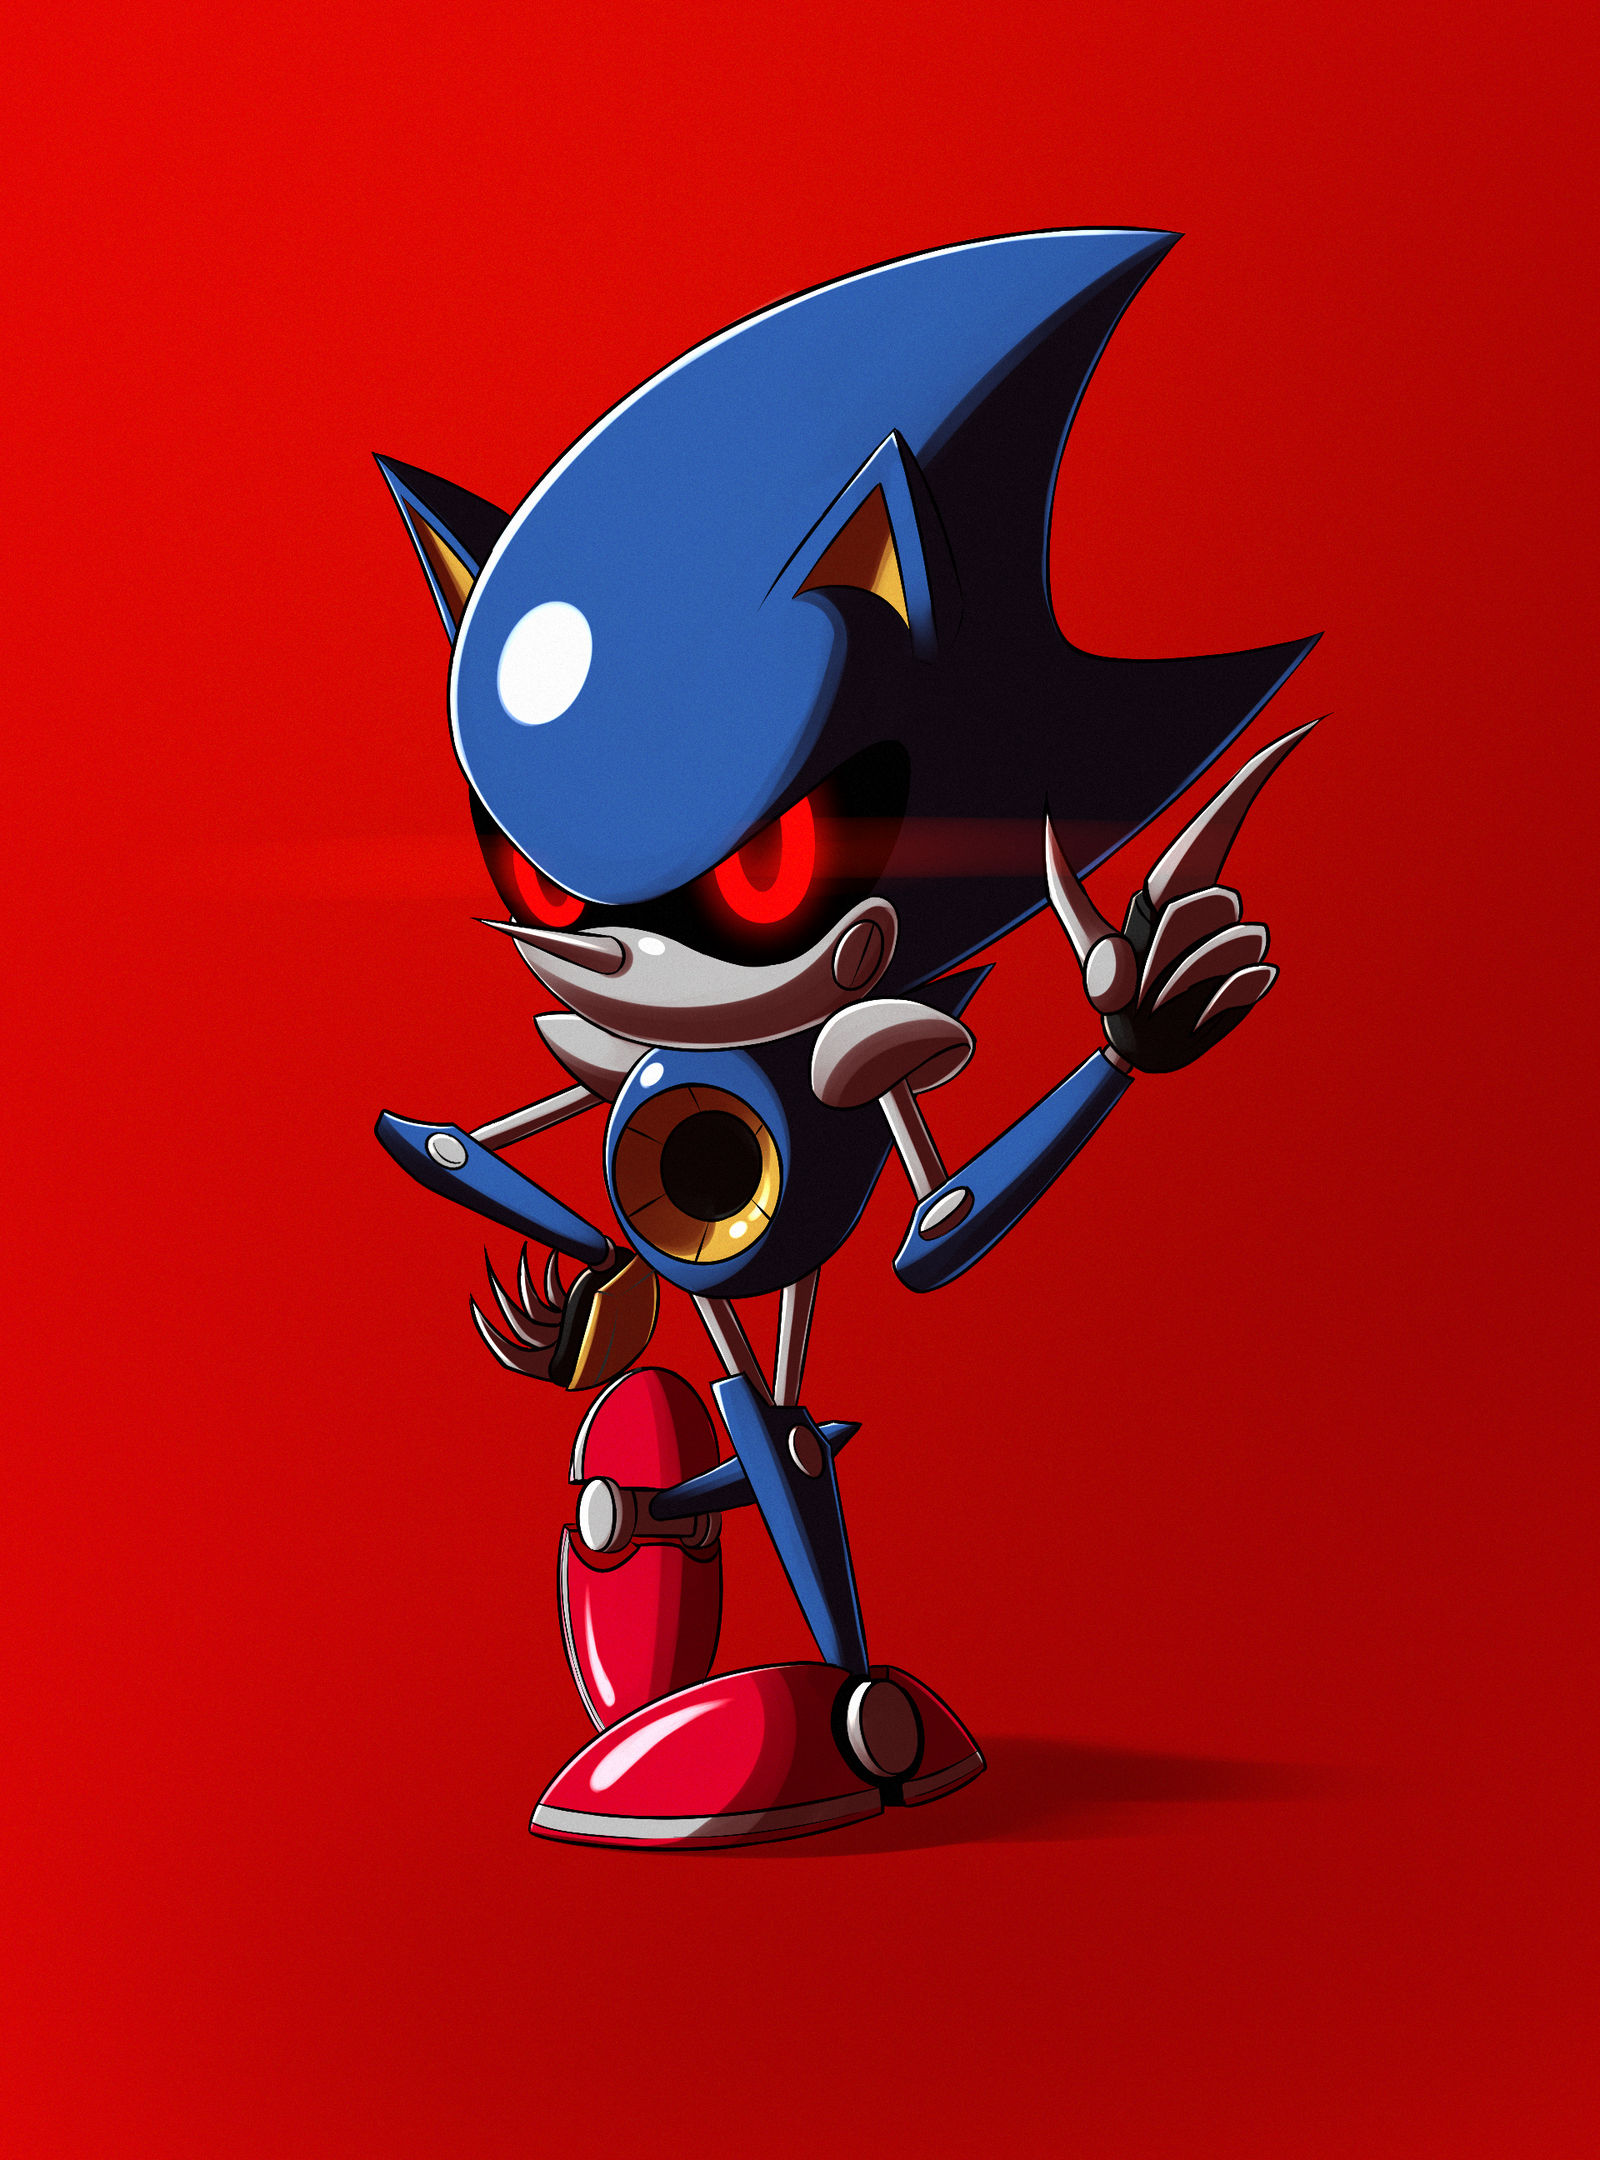 Metal sonic by g2ng2 on DeviantArt